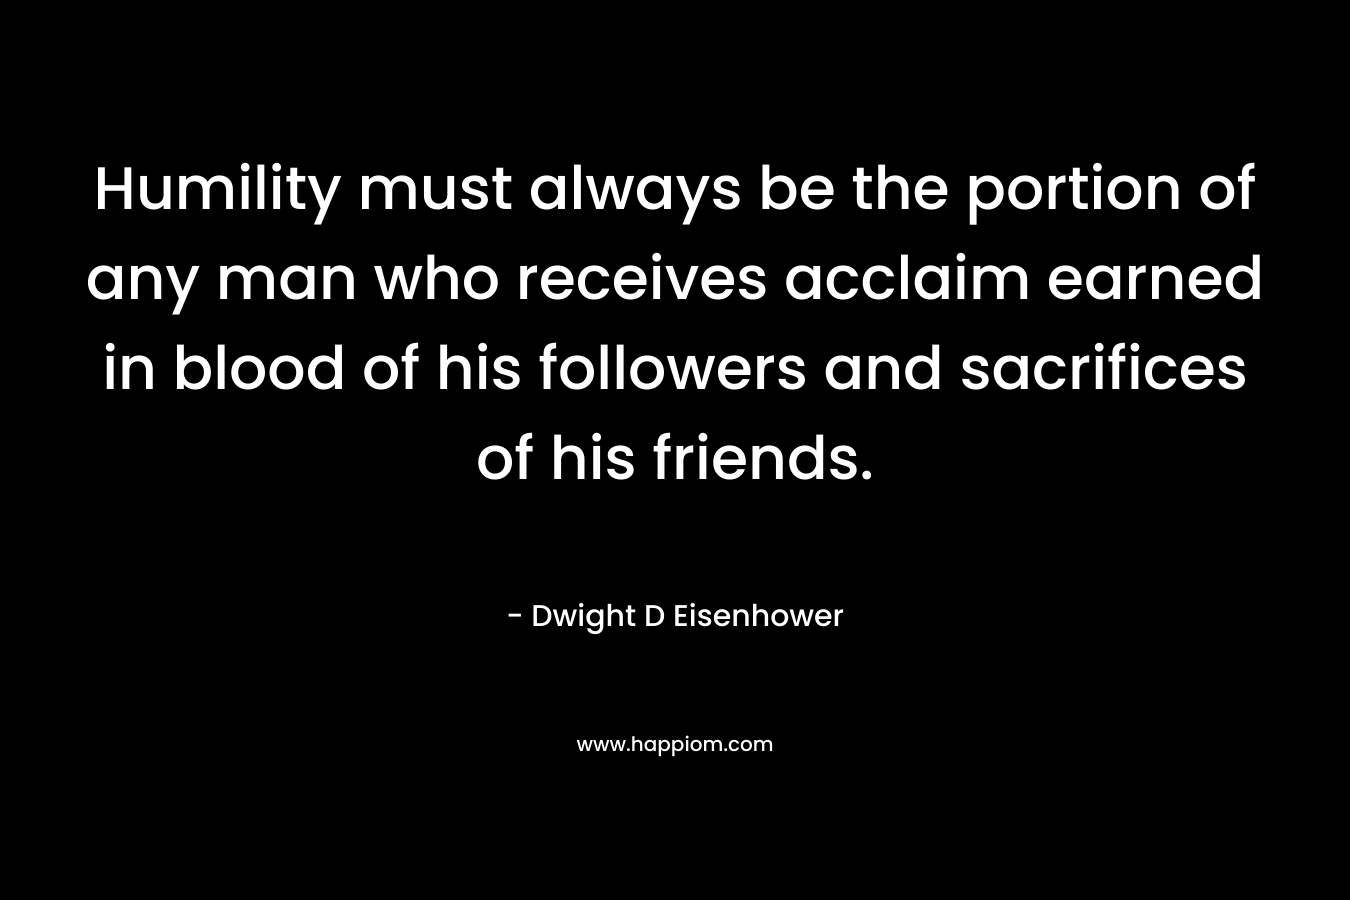 Humility must always be the portion of any man who receives acclaim earned in blood of his followers and sacrifices of his friends. – Dwight D Eisenhower